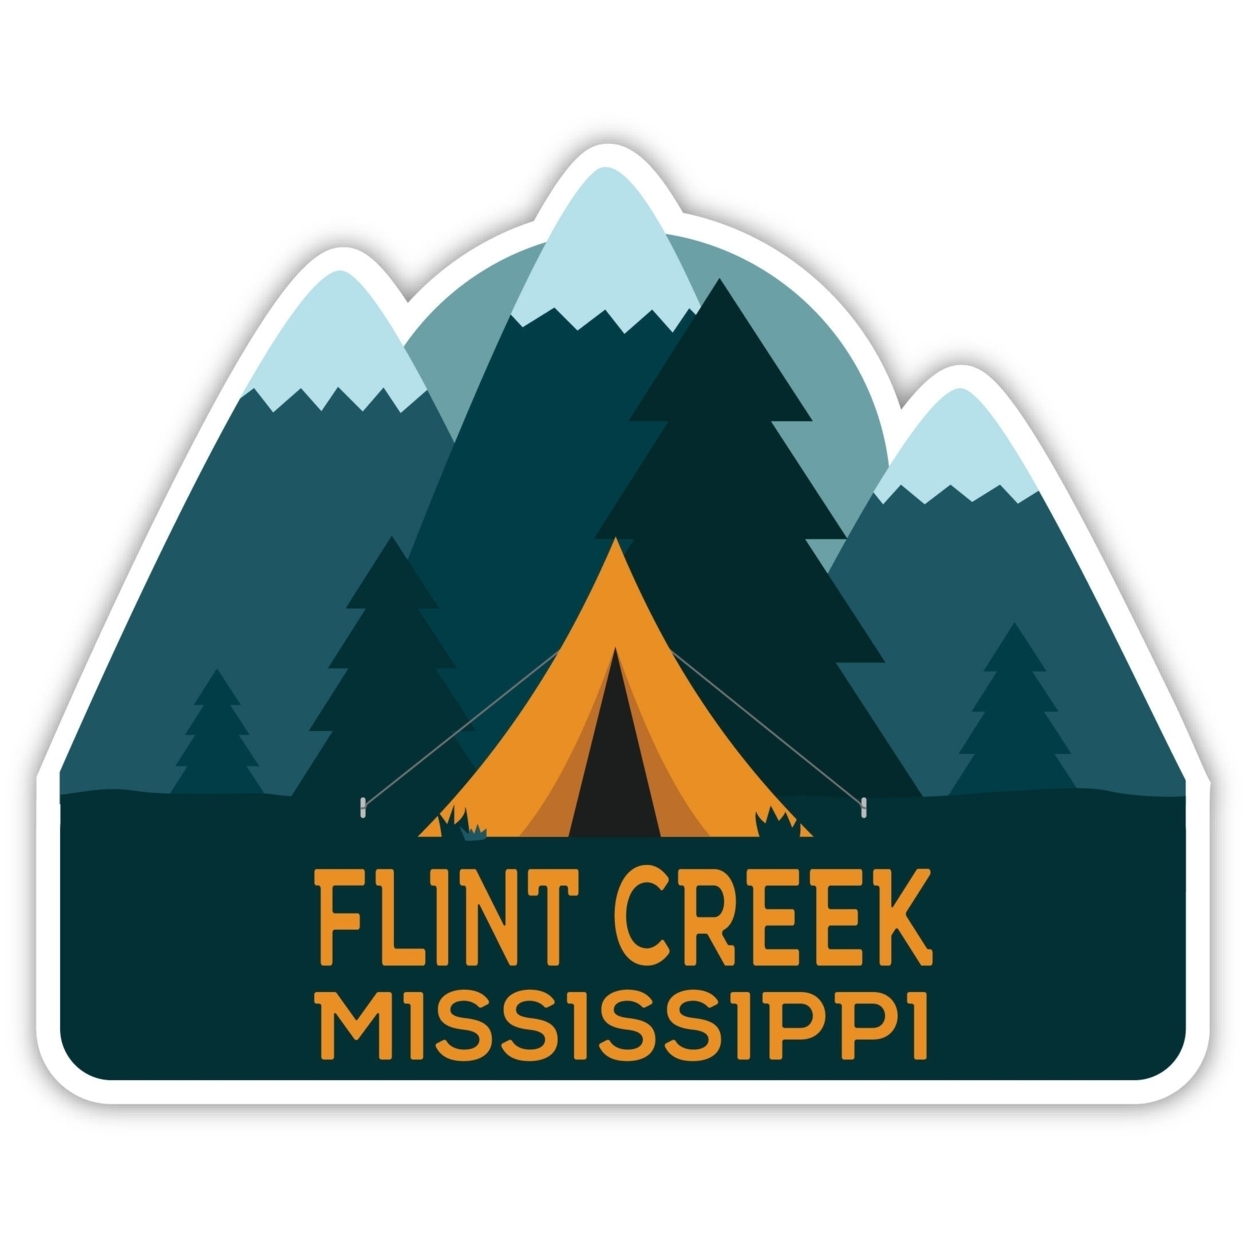 Flint Creek Mississippi Souvenir Decorative Stickers (Choose Theme And Size) - 4-Pack, 4-Inch, Tent